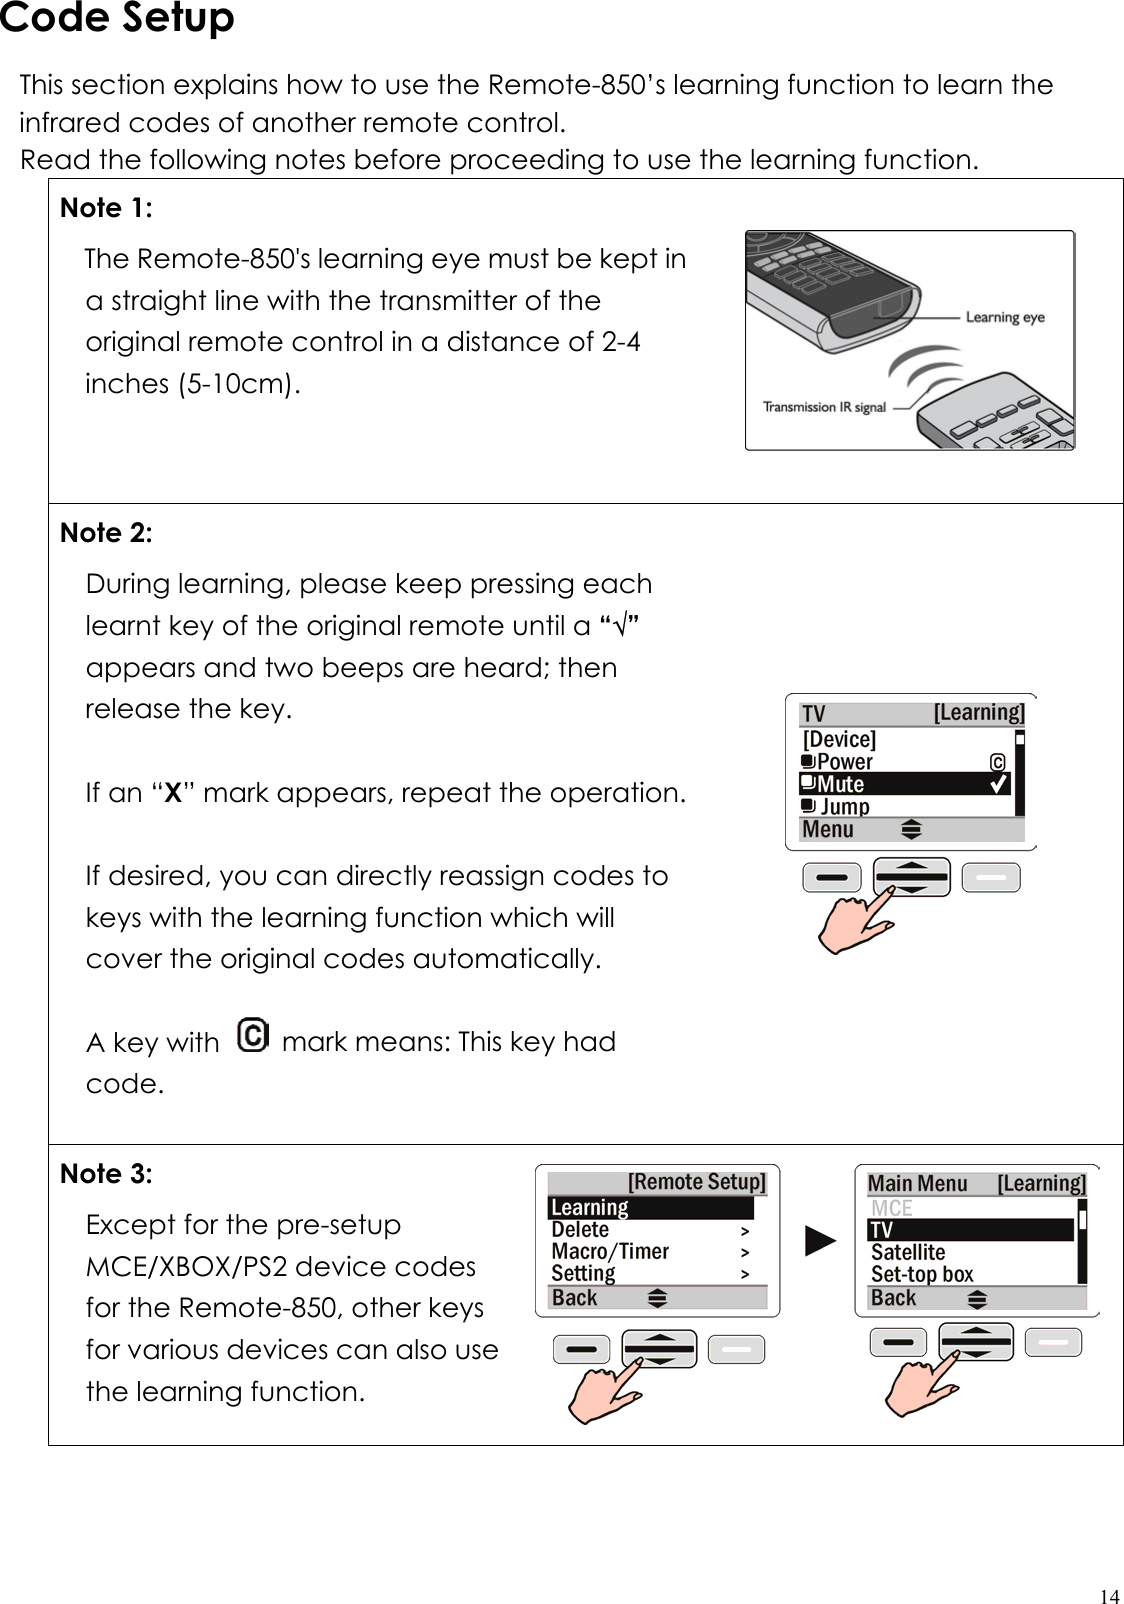  14Code Setup This section explains how to use the Remote-850’s learning function to learn the infrared codes of another remote control. Read the following notes before proceeding to use the learning function. Note 1: The Remote-850&apos;s learning eye must be kept in a straight line with the transmitter of the original remote control in a distance of 2-4 inches (5-10cm).  Note 2: During learning, please keep pressing each learnt key of the original remote until a “√” appears and two beeps are heard; then release the key.  If an “X” mark appears, repeat the operation.  If desired, you can directly reassign codes to keys with the learning function which will cover the original codes automatically.  A key with    mark means: This key had code.      Note 3: Except for the pre-setup MCE/XBOX/PS2 device codes for the Remote-850, other keys for various devices can also use the learning function.     